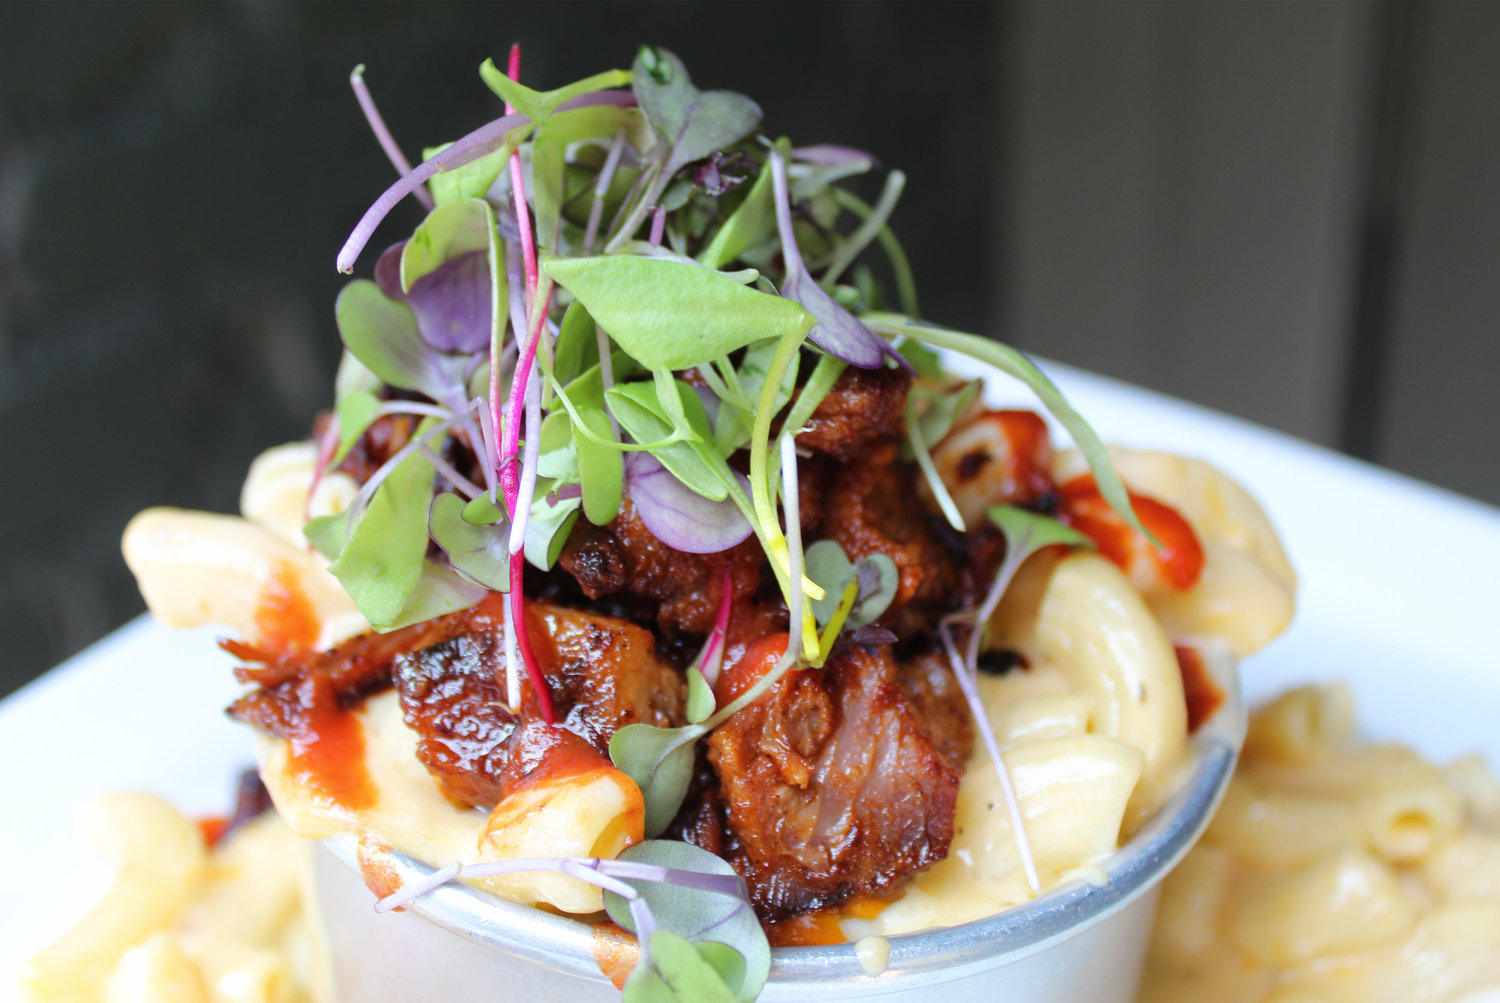 Pates elevates pub fare, like mac and cheese with brisket burnt ends